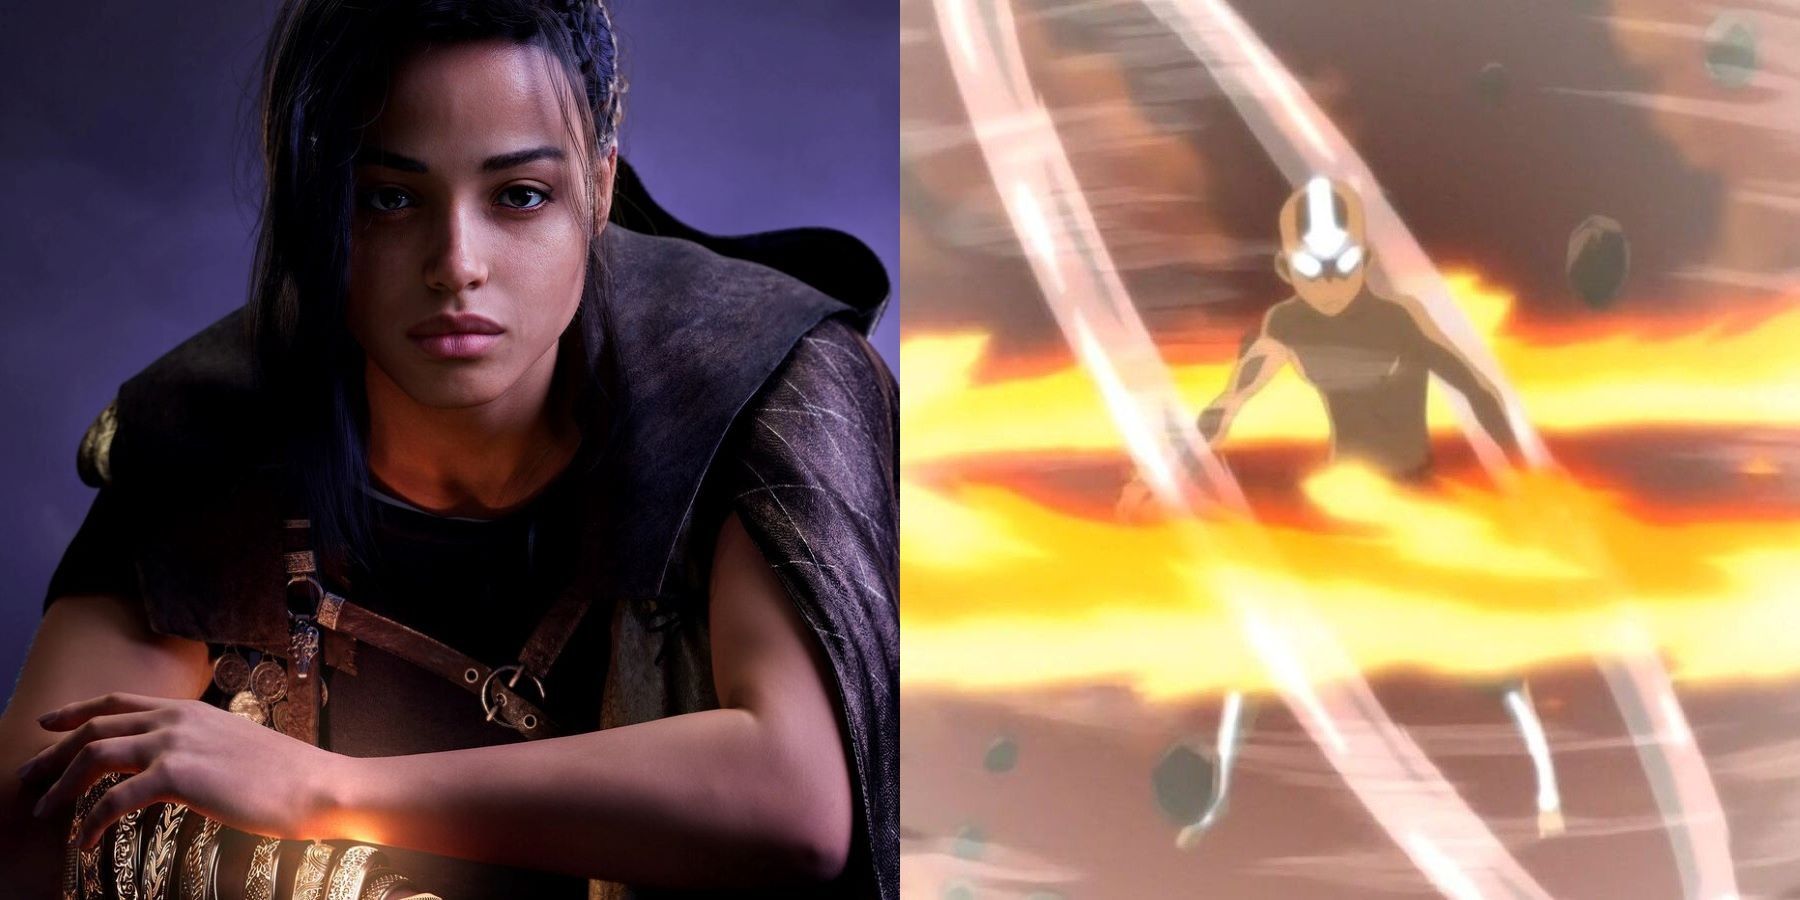 Forspoken's Frey Holland with Cuff and Avatar: The Last Air Bender's Aang in the Avatar State